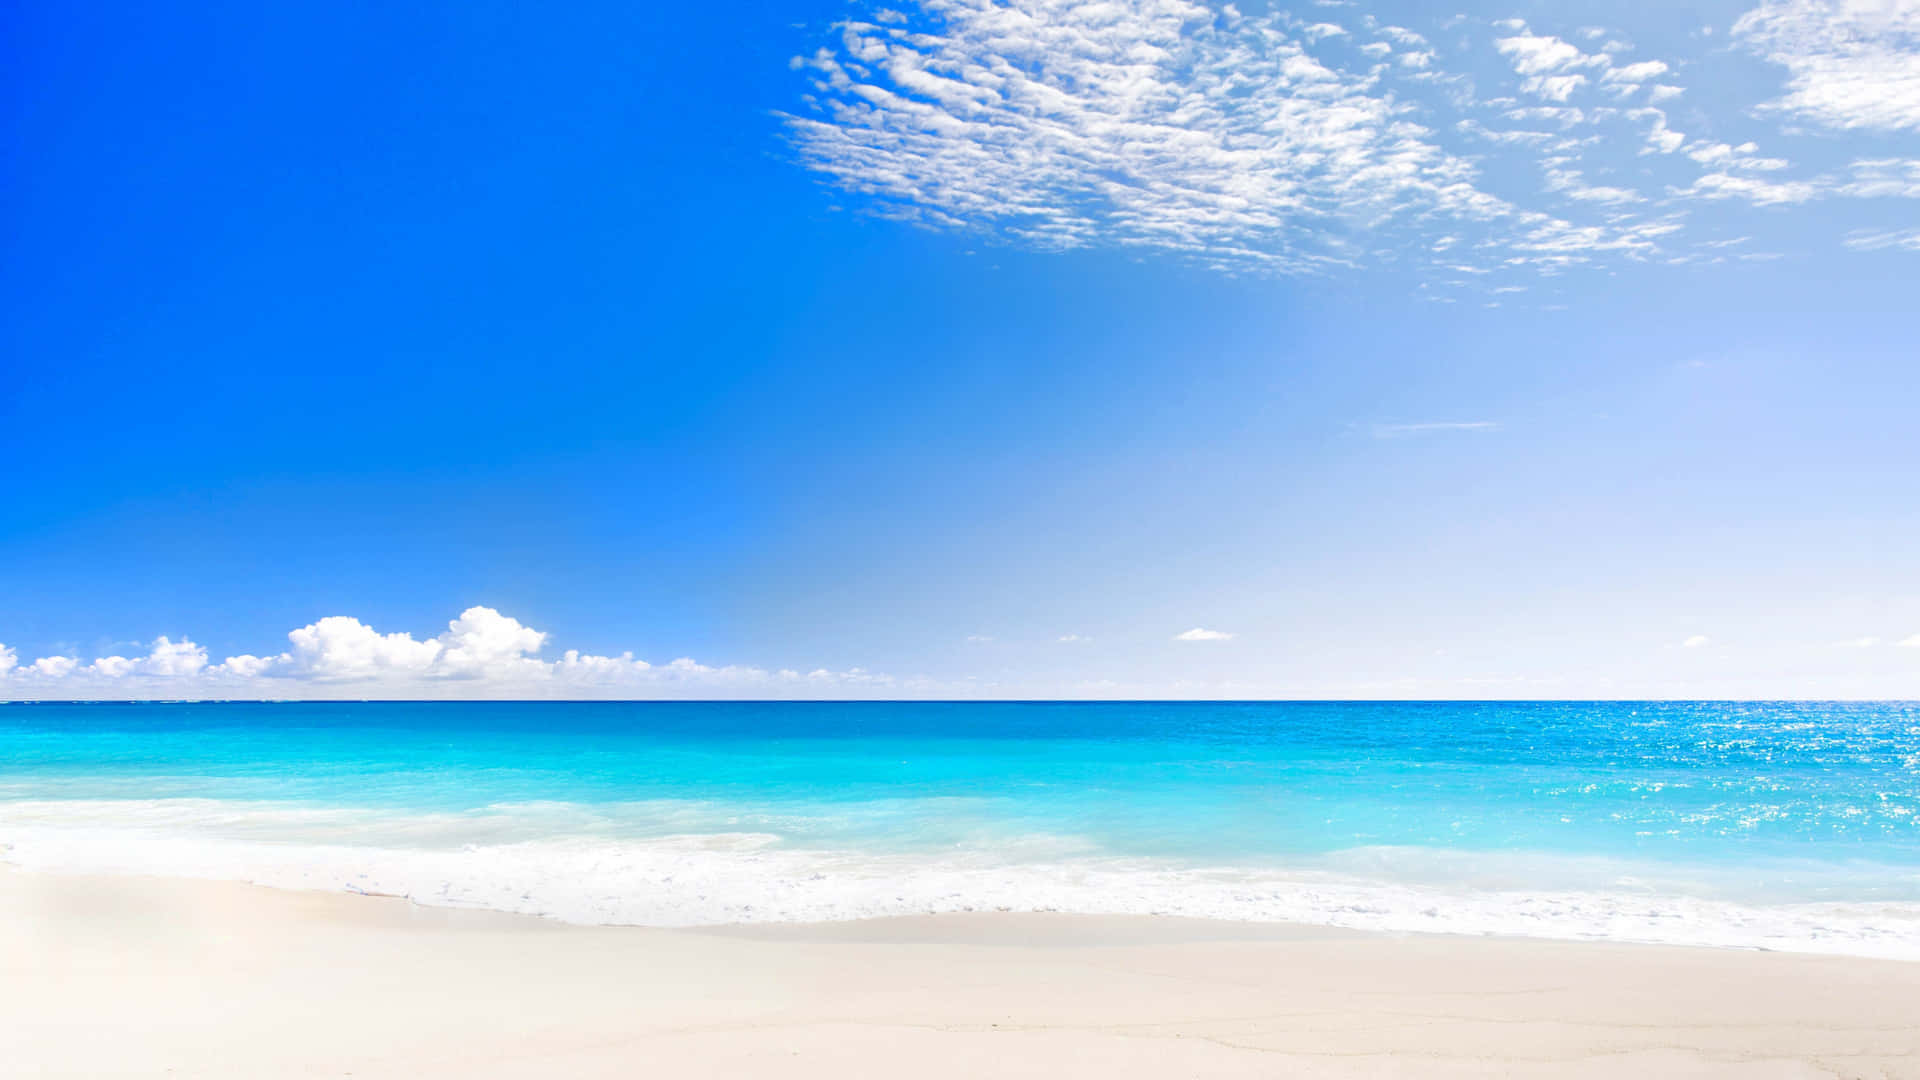 Experience the calming vibes of a sunny day at the beach